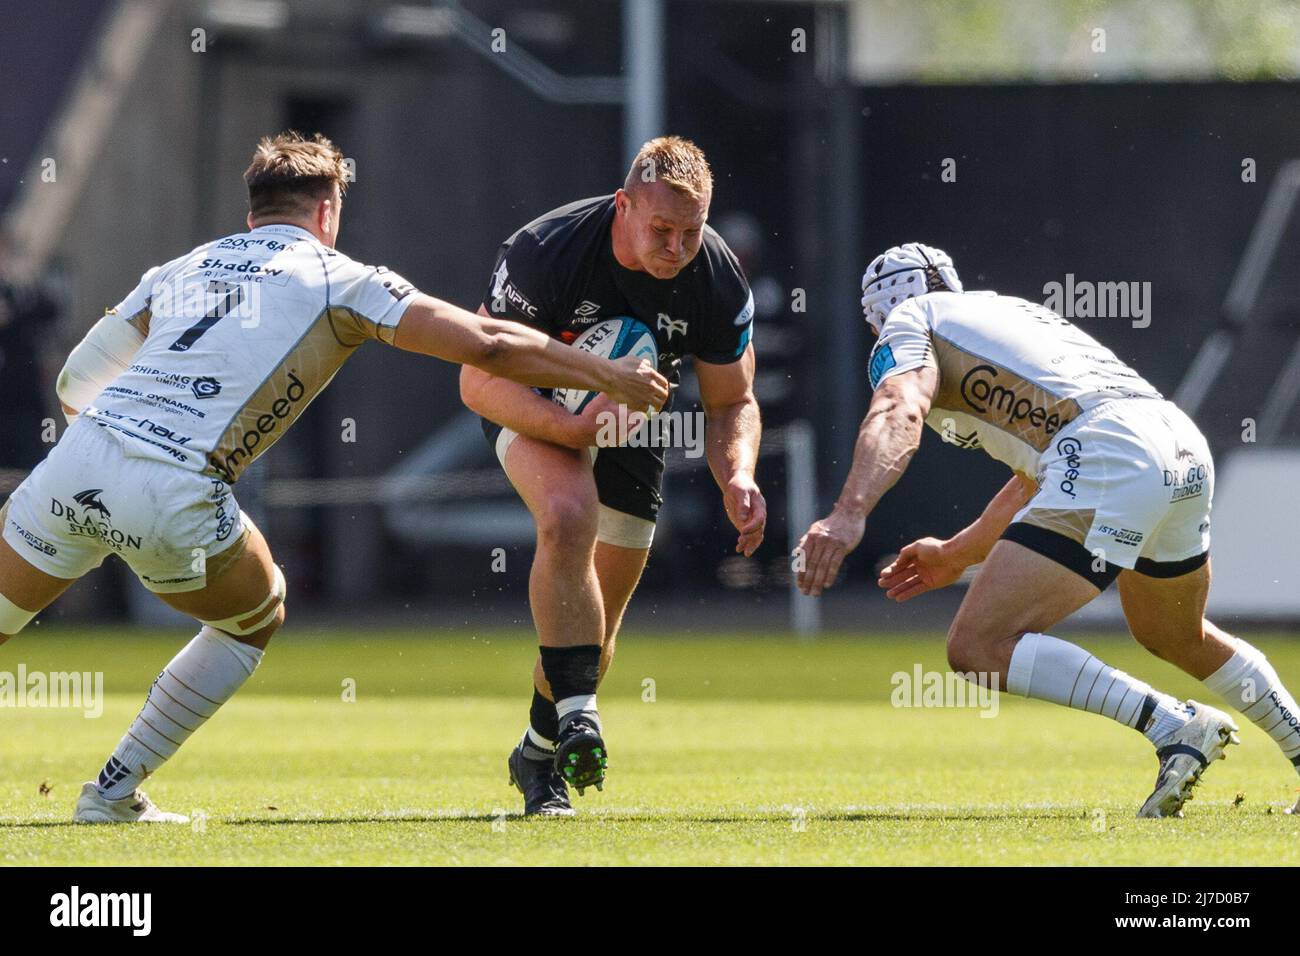 Swansea, UK. 8 May, 2022. Dewi Lake of Ospreys on the charge during the Ospreys v Dragons United Rugby Championship Match. Credit: Gruffydd ThomasAlamy Stock Photo